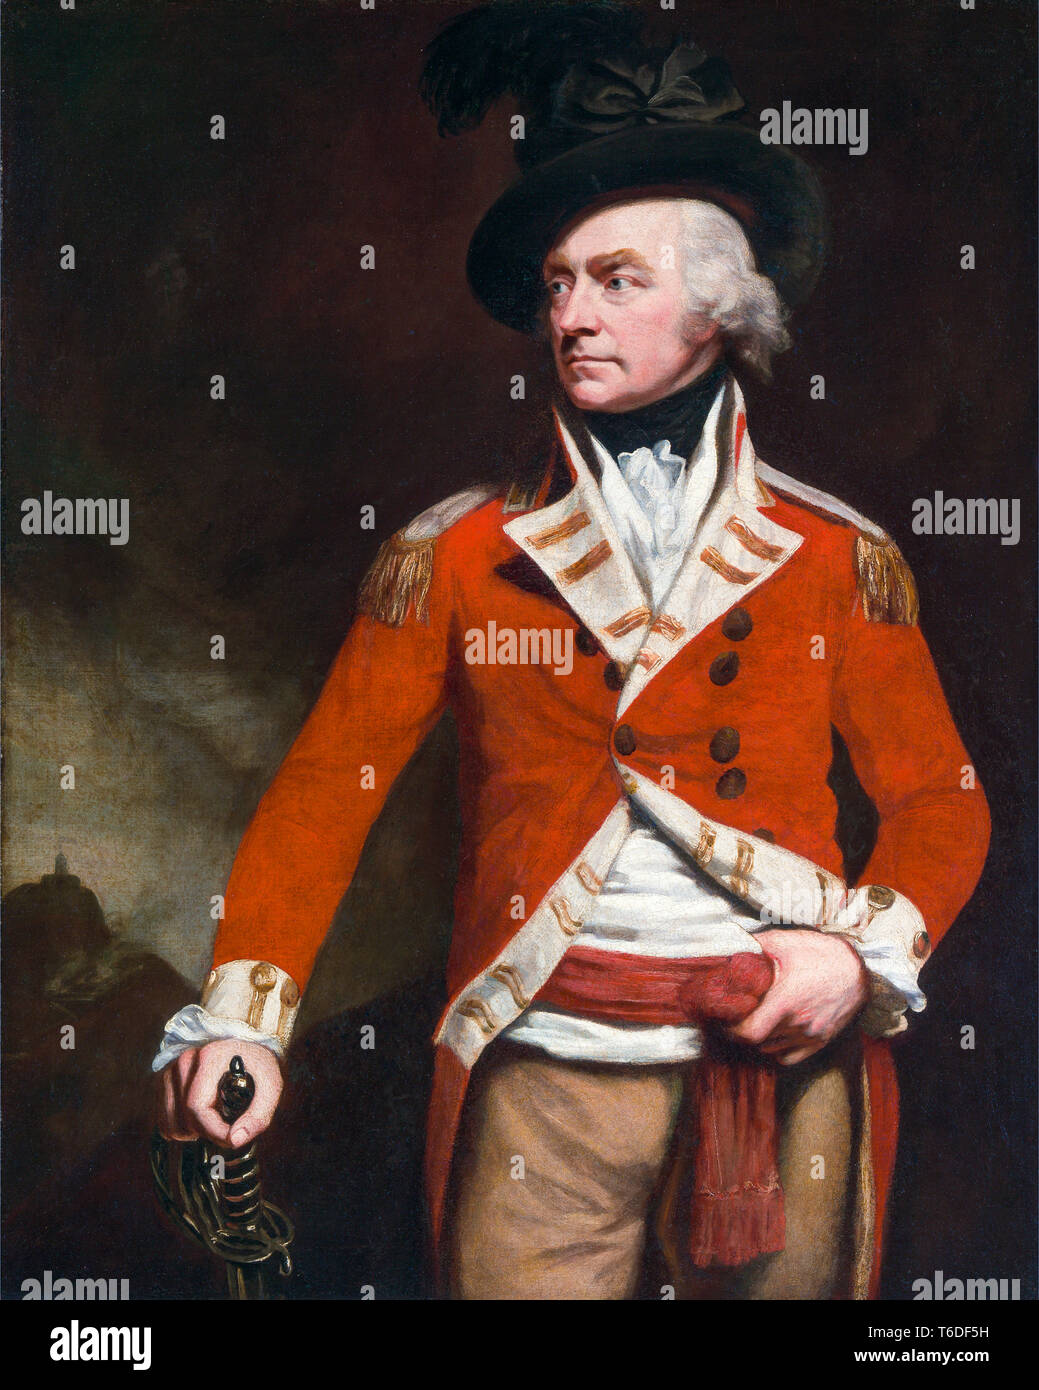 Colonel Donald MacLeod of St. Kilda, An Officer in the East India Uniform of the 74th (Highland) Regiment, portrait painting by John Opie, c. 1796 Stock Photo